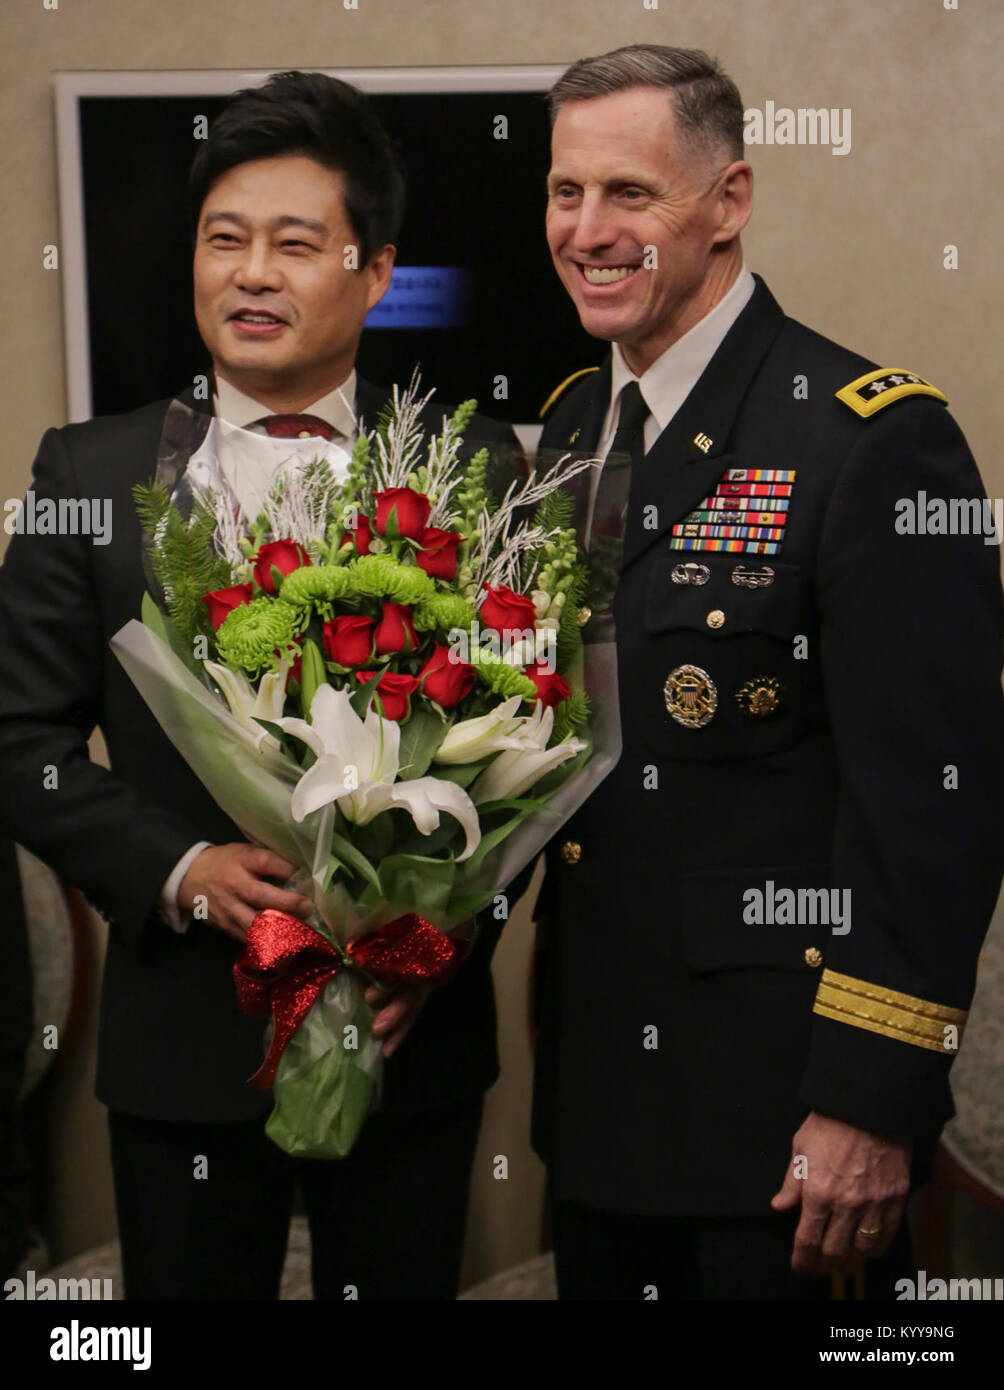 U.S Army Lt. Gen. Thomas S. Vandal commander of the Eighth army, presents flowers to Seo, Jung-Hak after the Holiday concert in Seoul, Korea Dec. 17, 2017. The concert was hosted by the Eighth Army command in conjunction with local community leaders during the holiday season to promote harmonious relations between the U.S. Army and the Republic of Korea (ROK). Over 1500 U.S. Soldiers and ROK soldiers attended performances by the Eighth Army Band and the Prime Philharmonic Orchestra . (U.S. Army Stock Photo